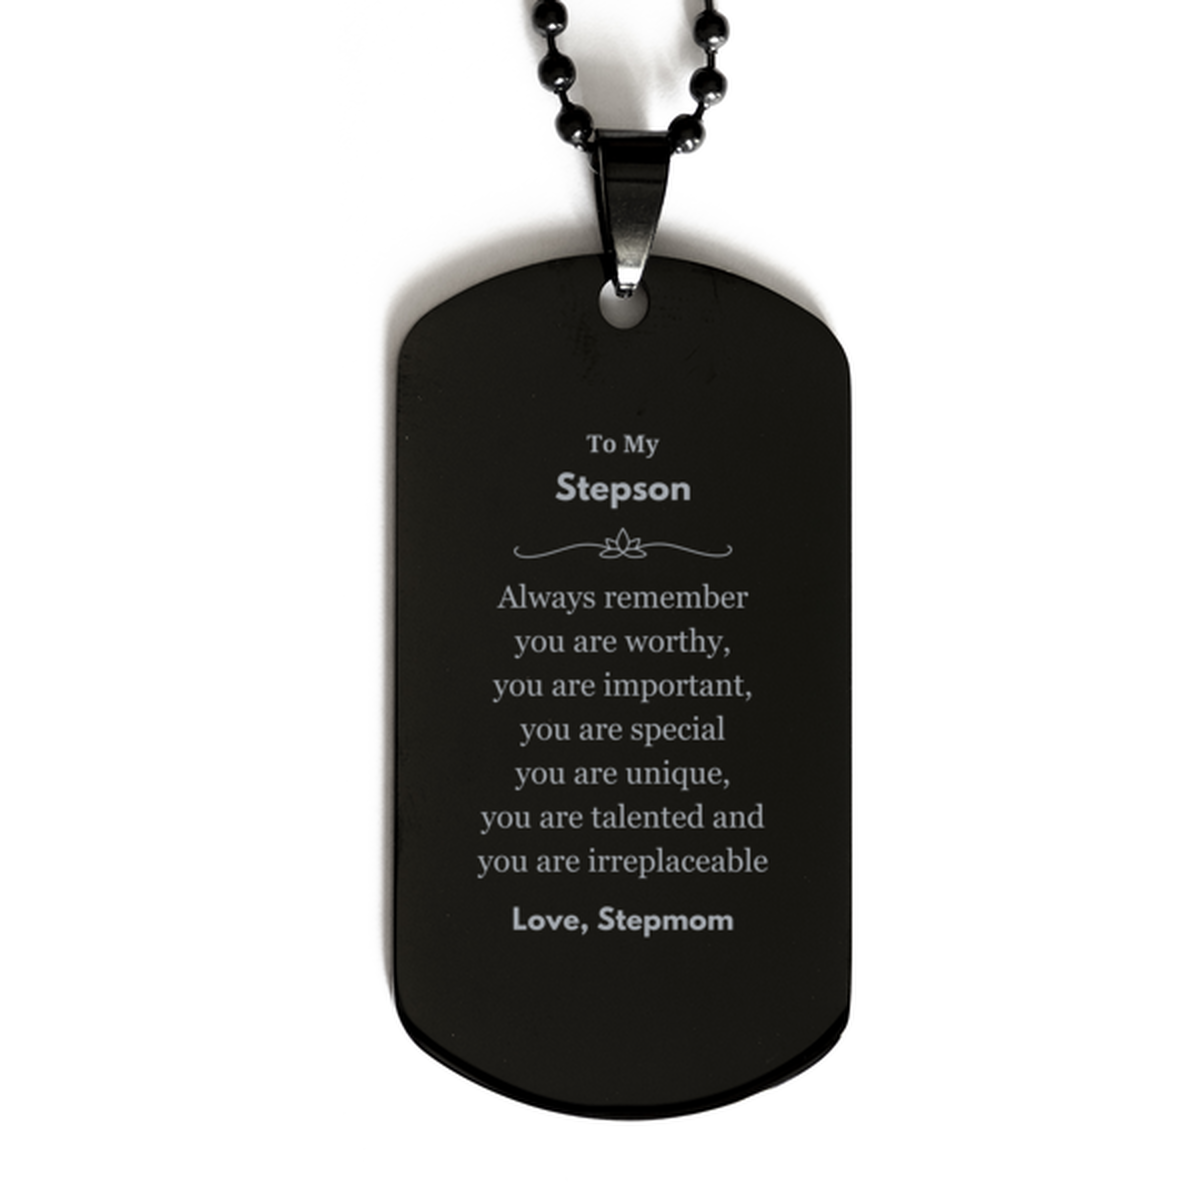 Stepson Birthday Gifts from Stepmom, Inspirational Black Dog Tag for Stepson Christmas Graduation Gifts for Stepson Always remember you are worthy, you are important. Love, Stepmom